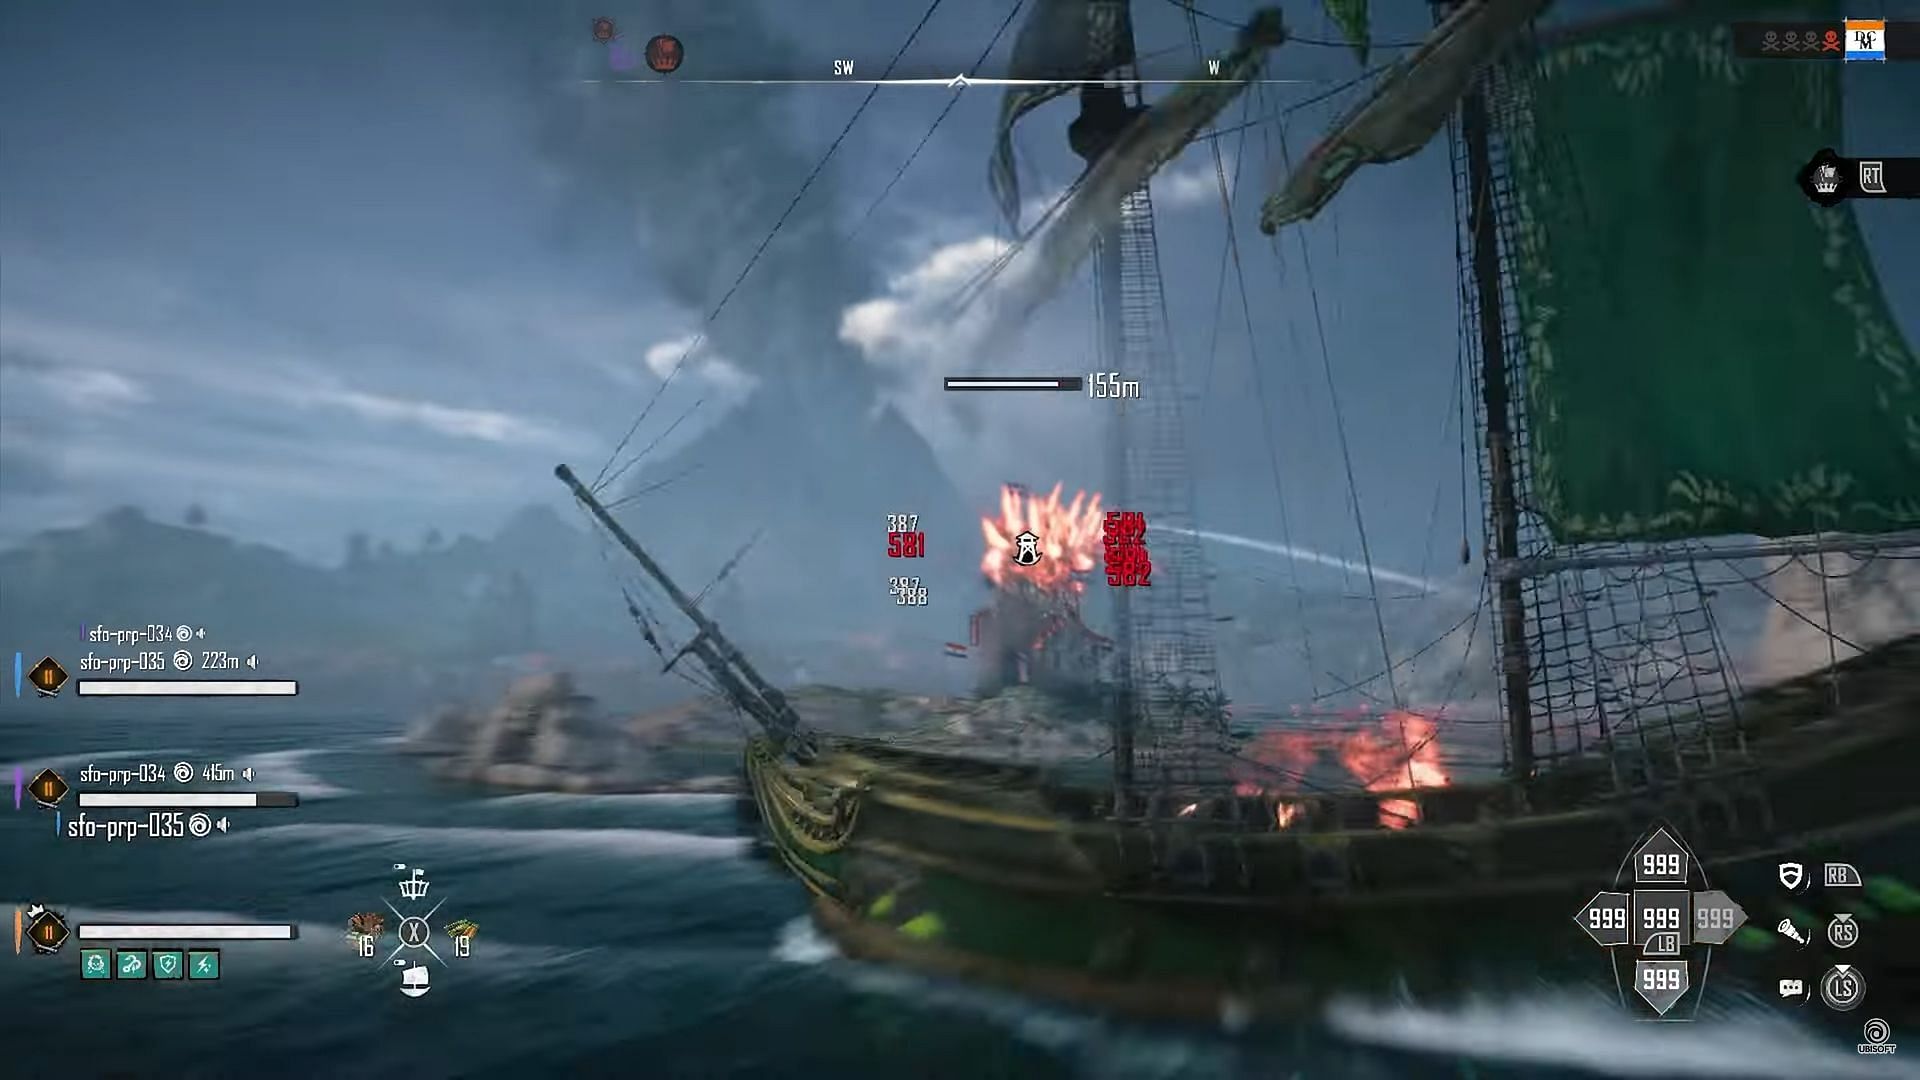 You will need to repair your ship in Skull and Bones to survive the deadly waters (Image via Ubisoft)